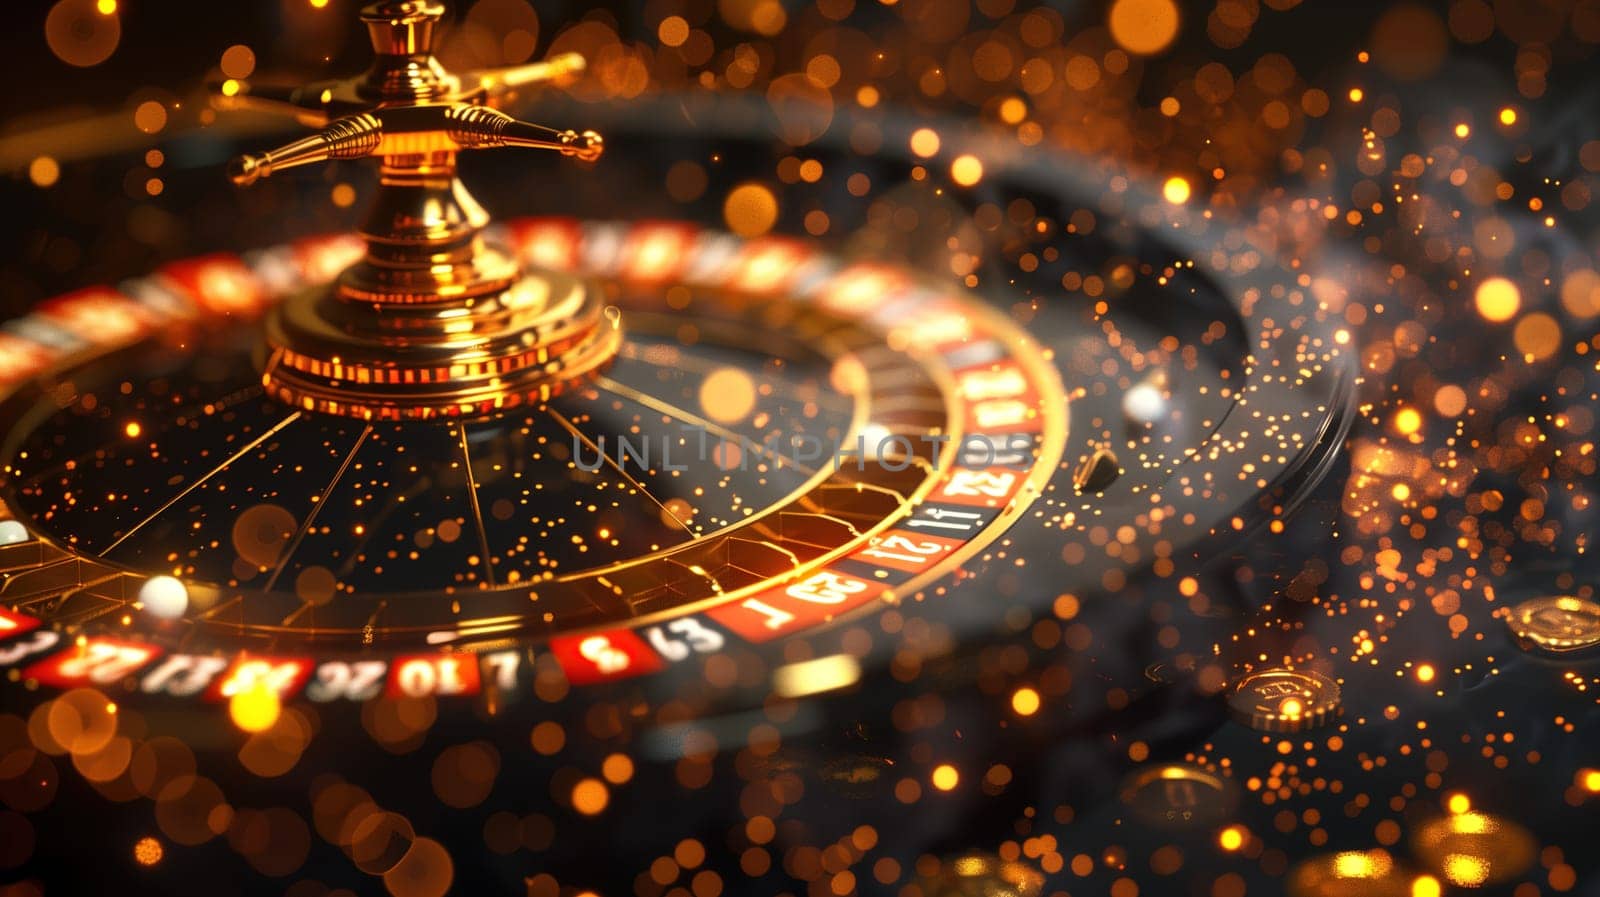 A close-up view presents the dynamic motion of a roulette wheel in a luxurious casino setting, highlighted by golden sparkles that suggest the thrill and excitement of gambling. The ambient lighting casts a warm glow, emphasizing the golden hues and creating an atmosphere of opulence.